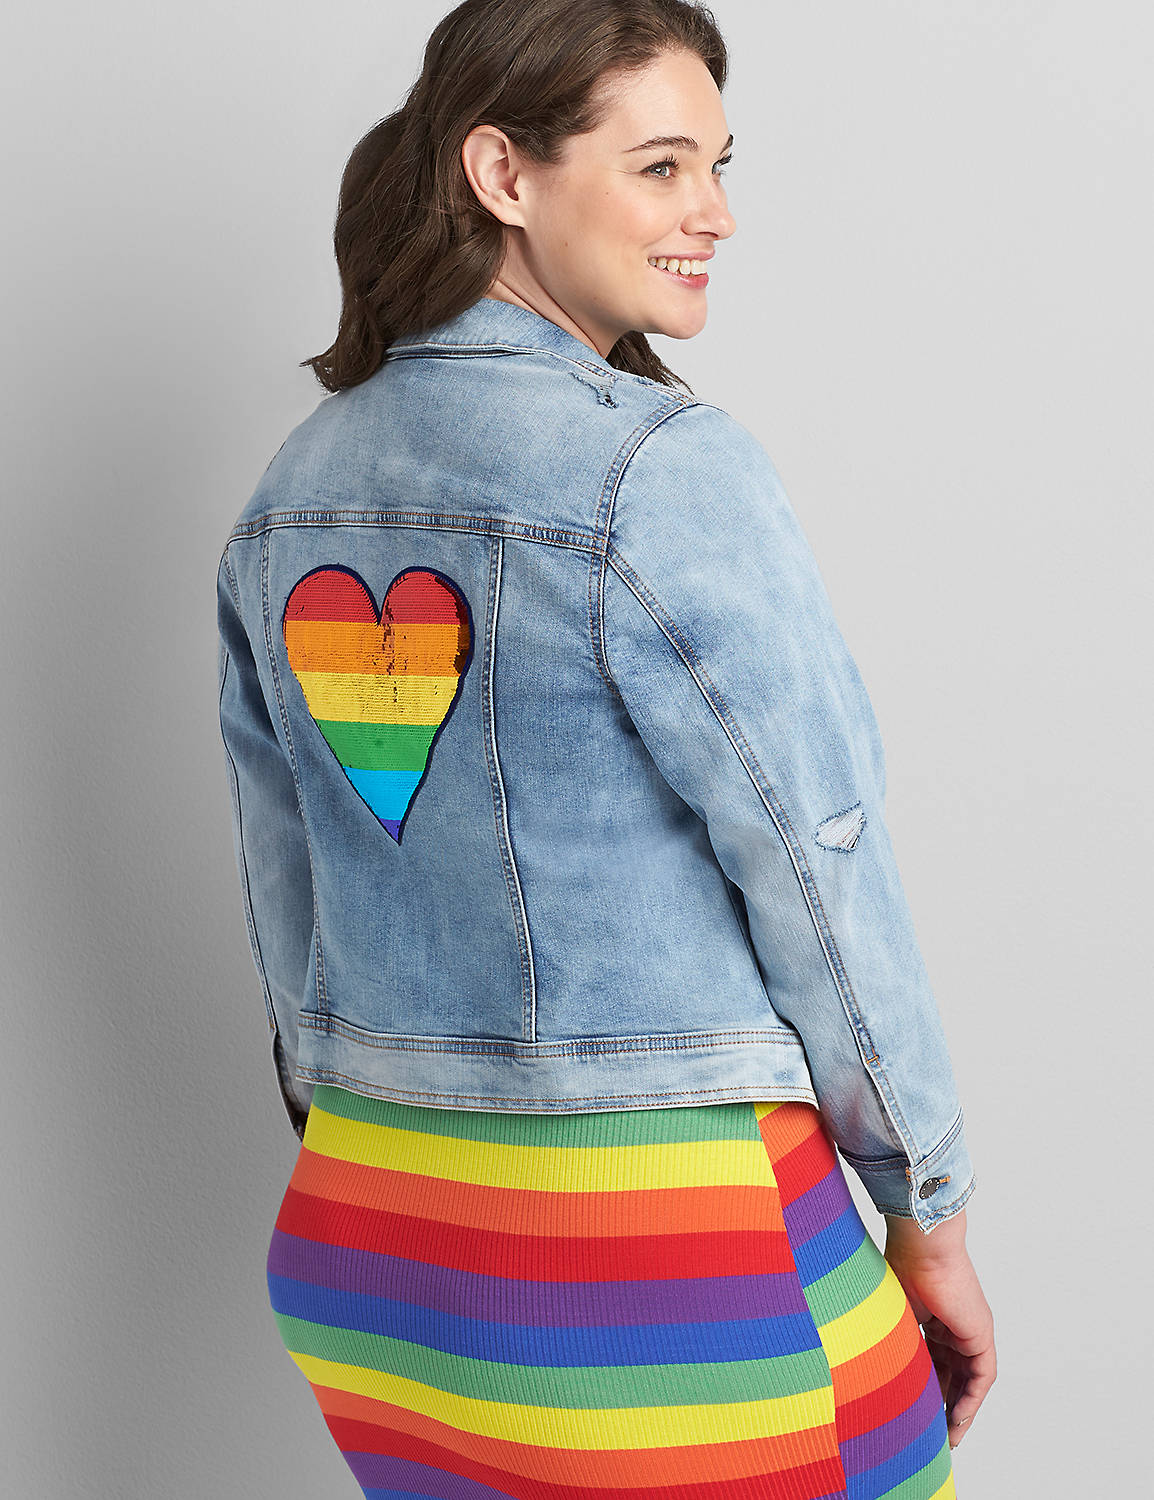 Denim Jacket - Light Wash with Sequin Heart Product Image 1